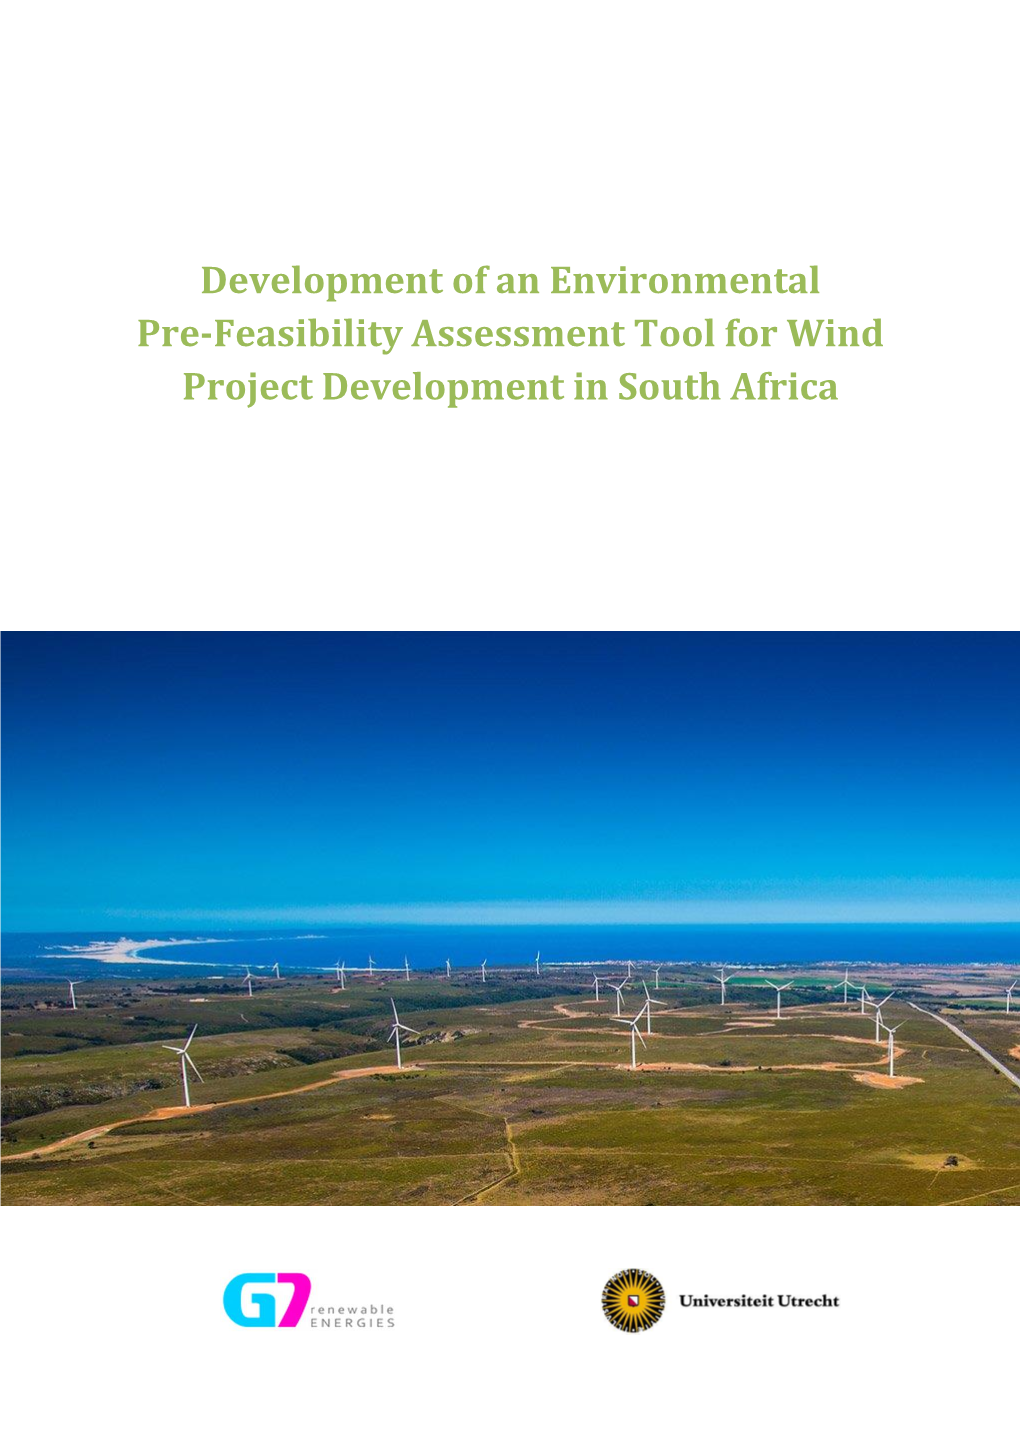 Development of an Environmental Pre-Feasibility Assessment Tool for Wind Project Development in South Africa